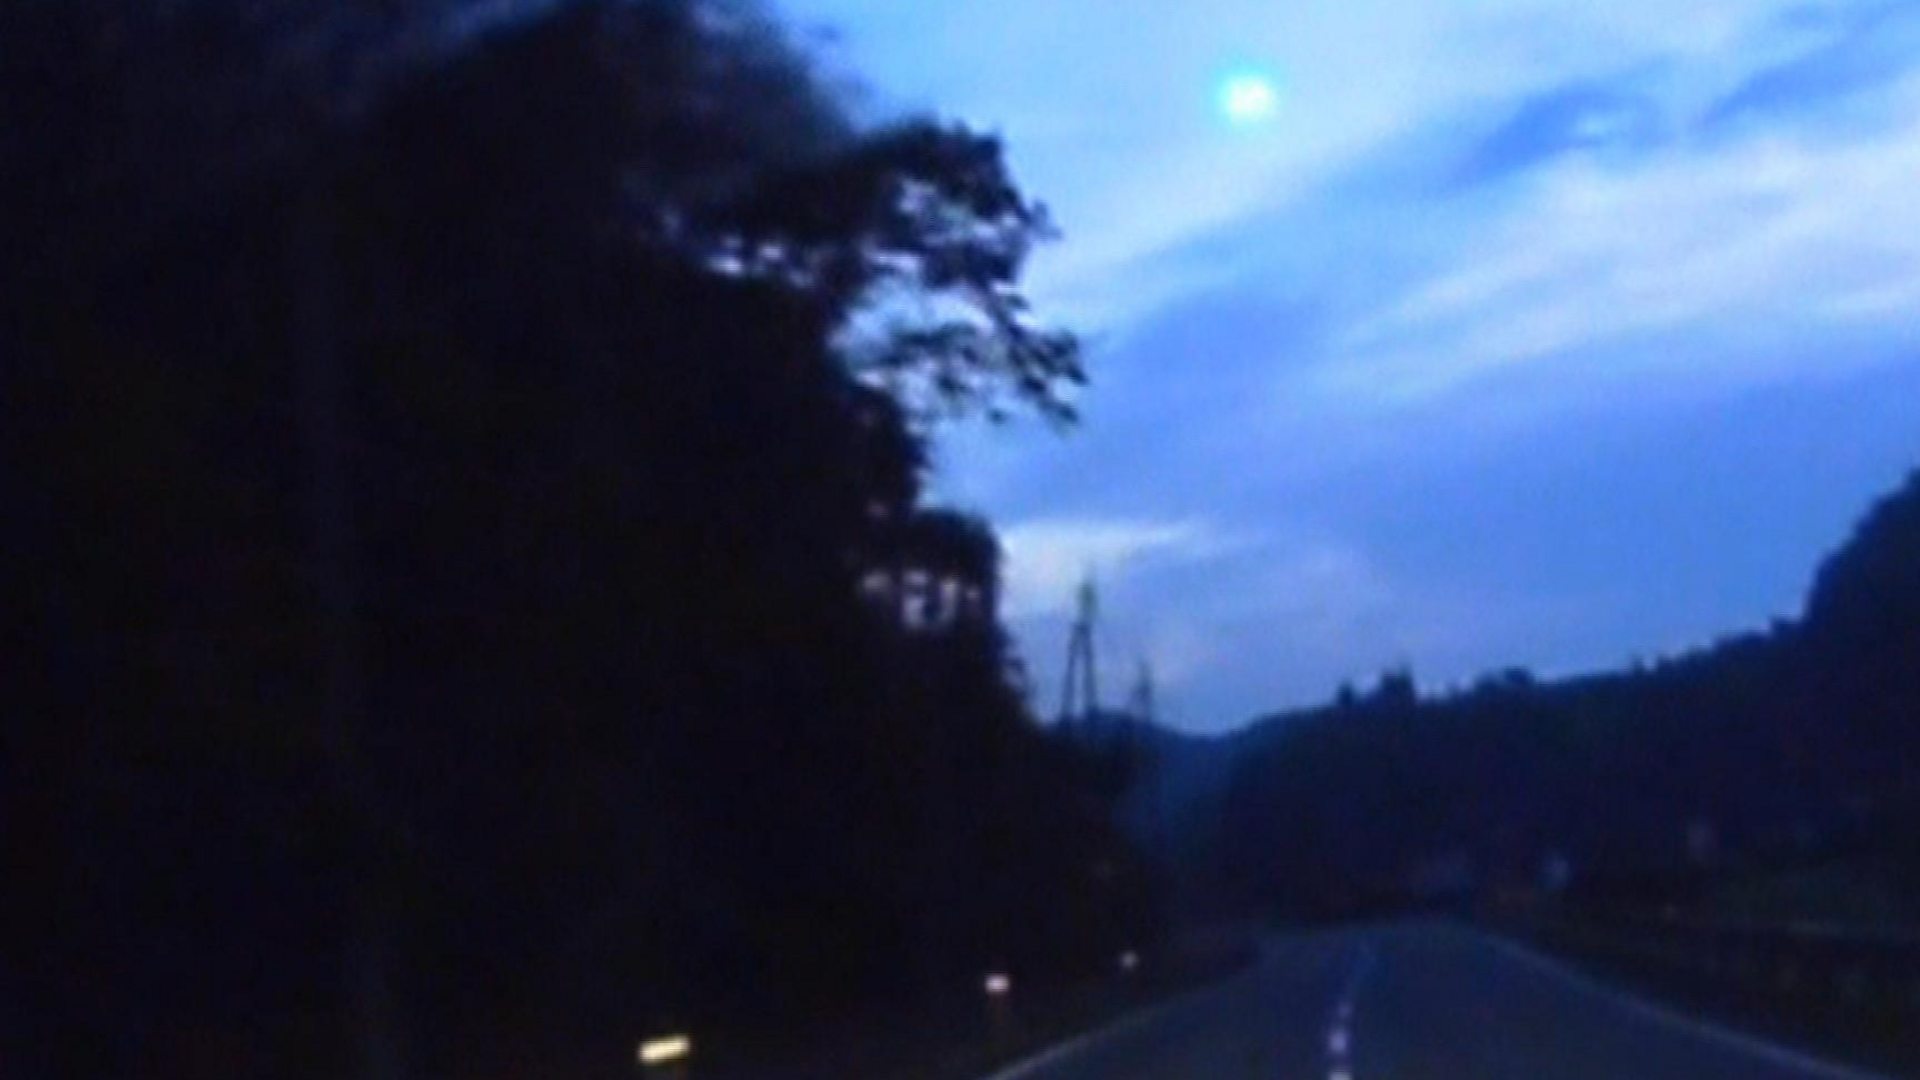 Unusual light source in sky leaves people with questions